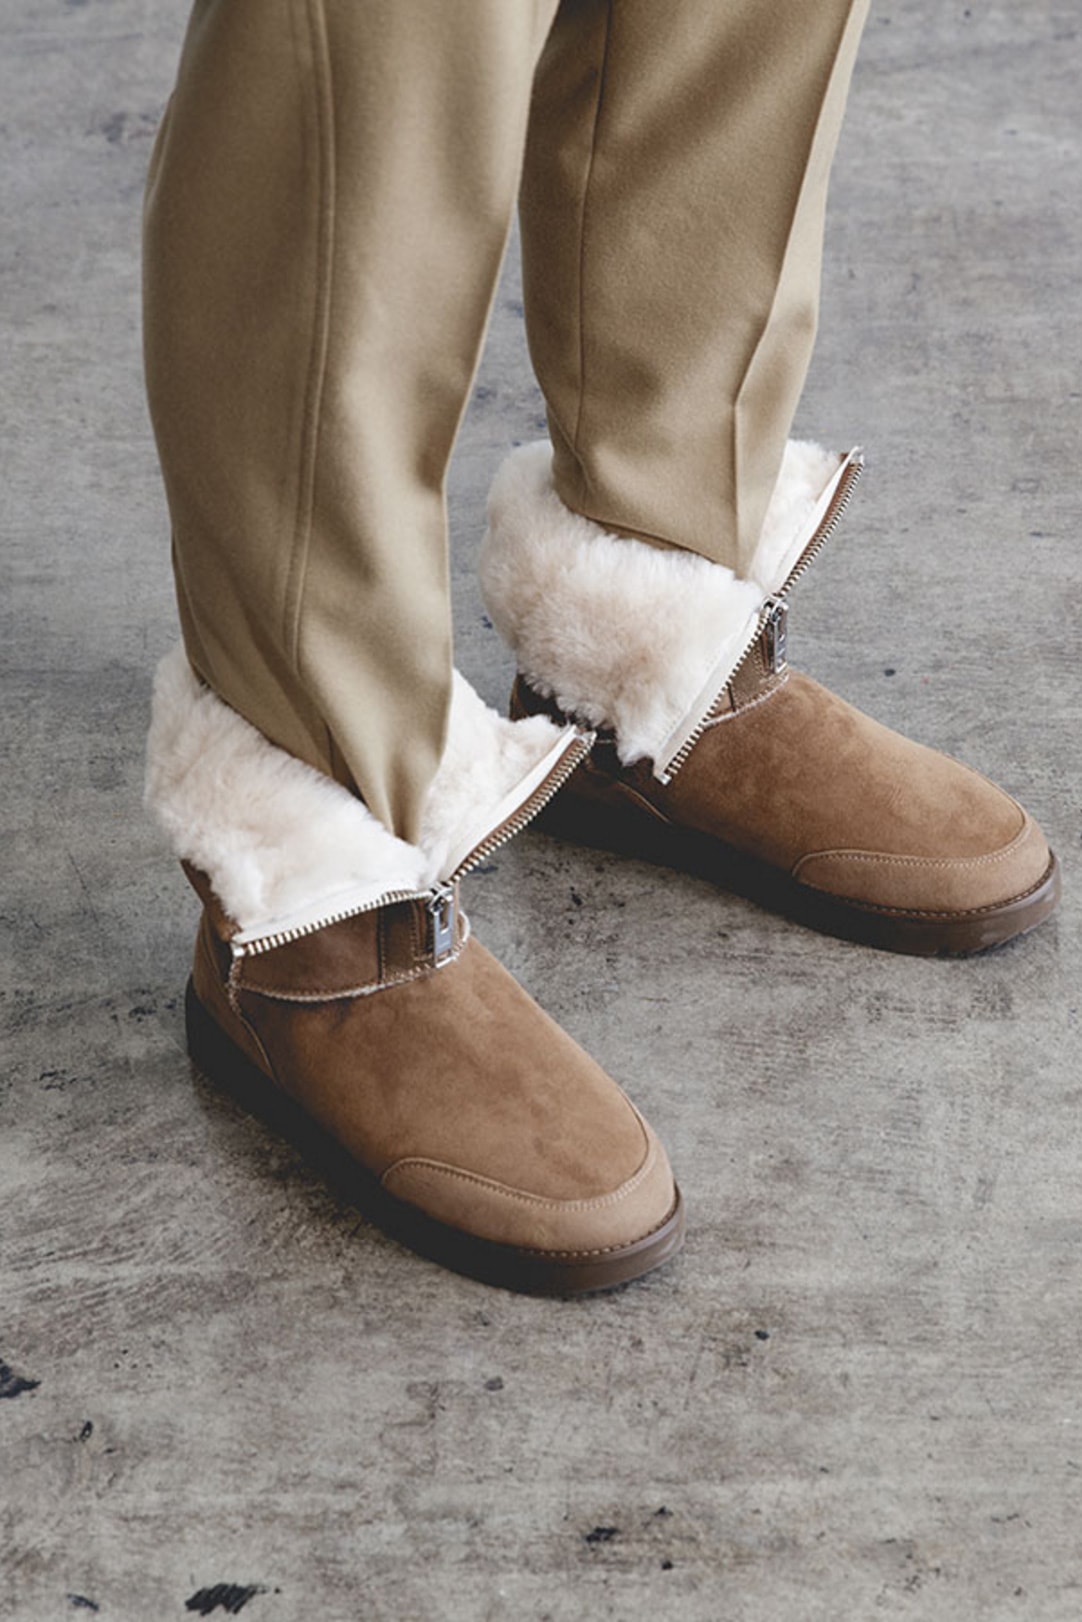 UGG x 3.1 Phillip Lim Boots Now Available